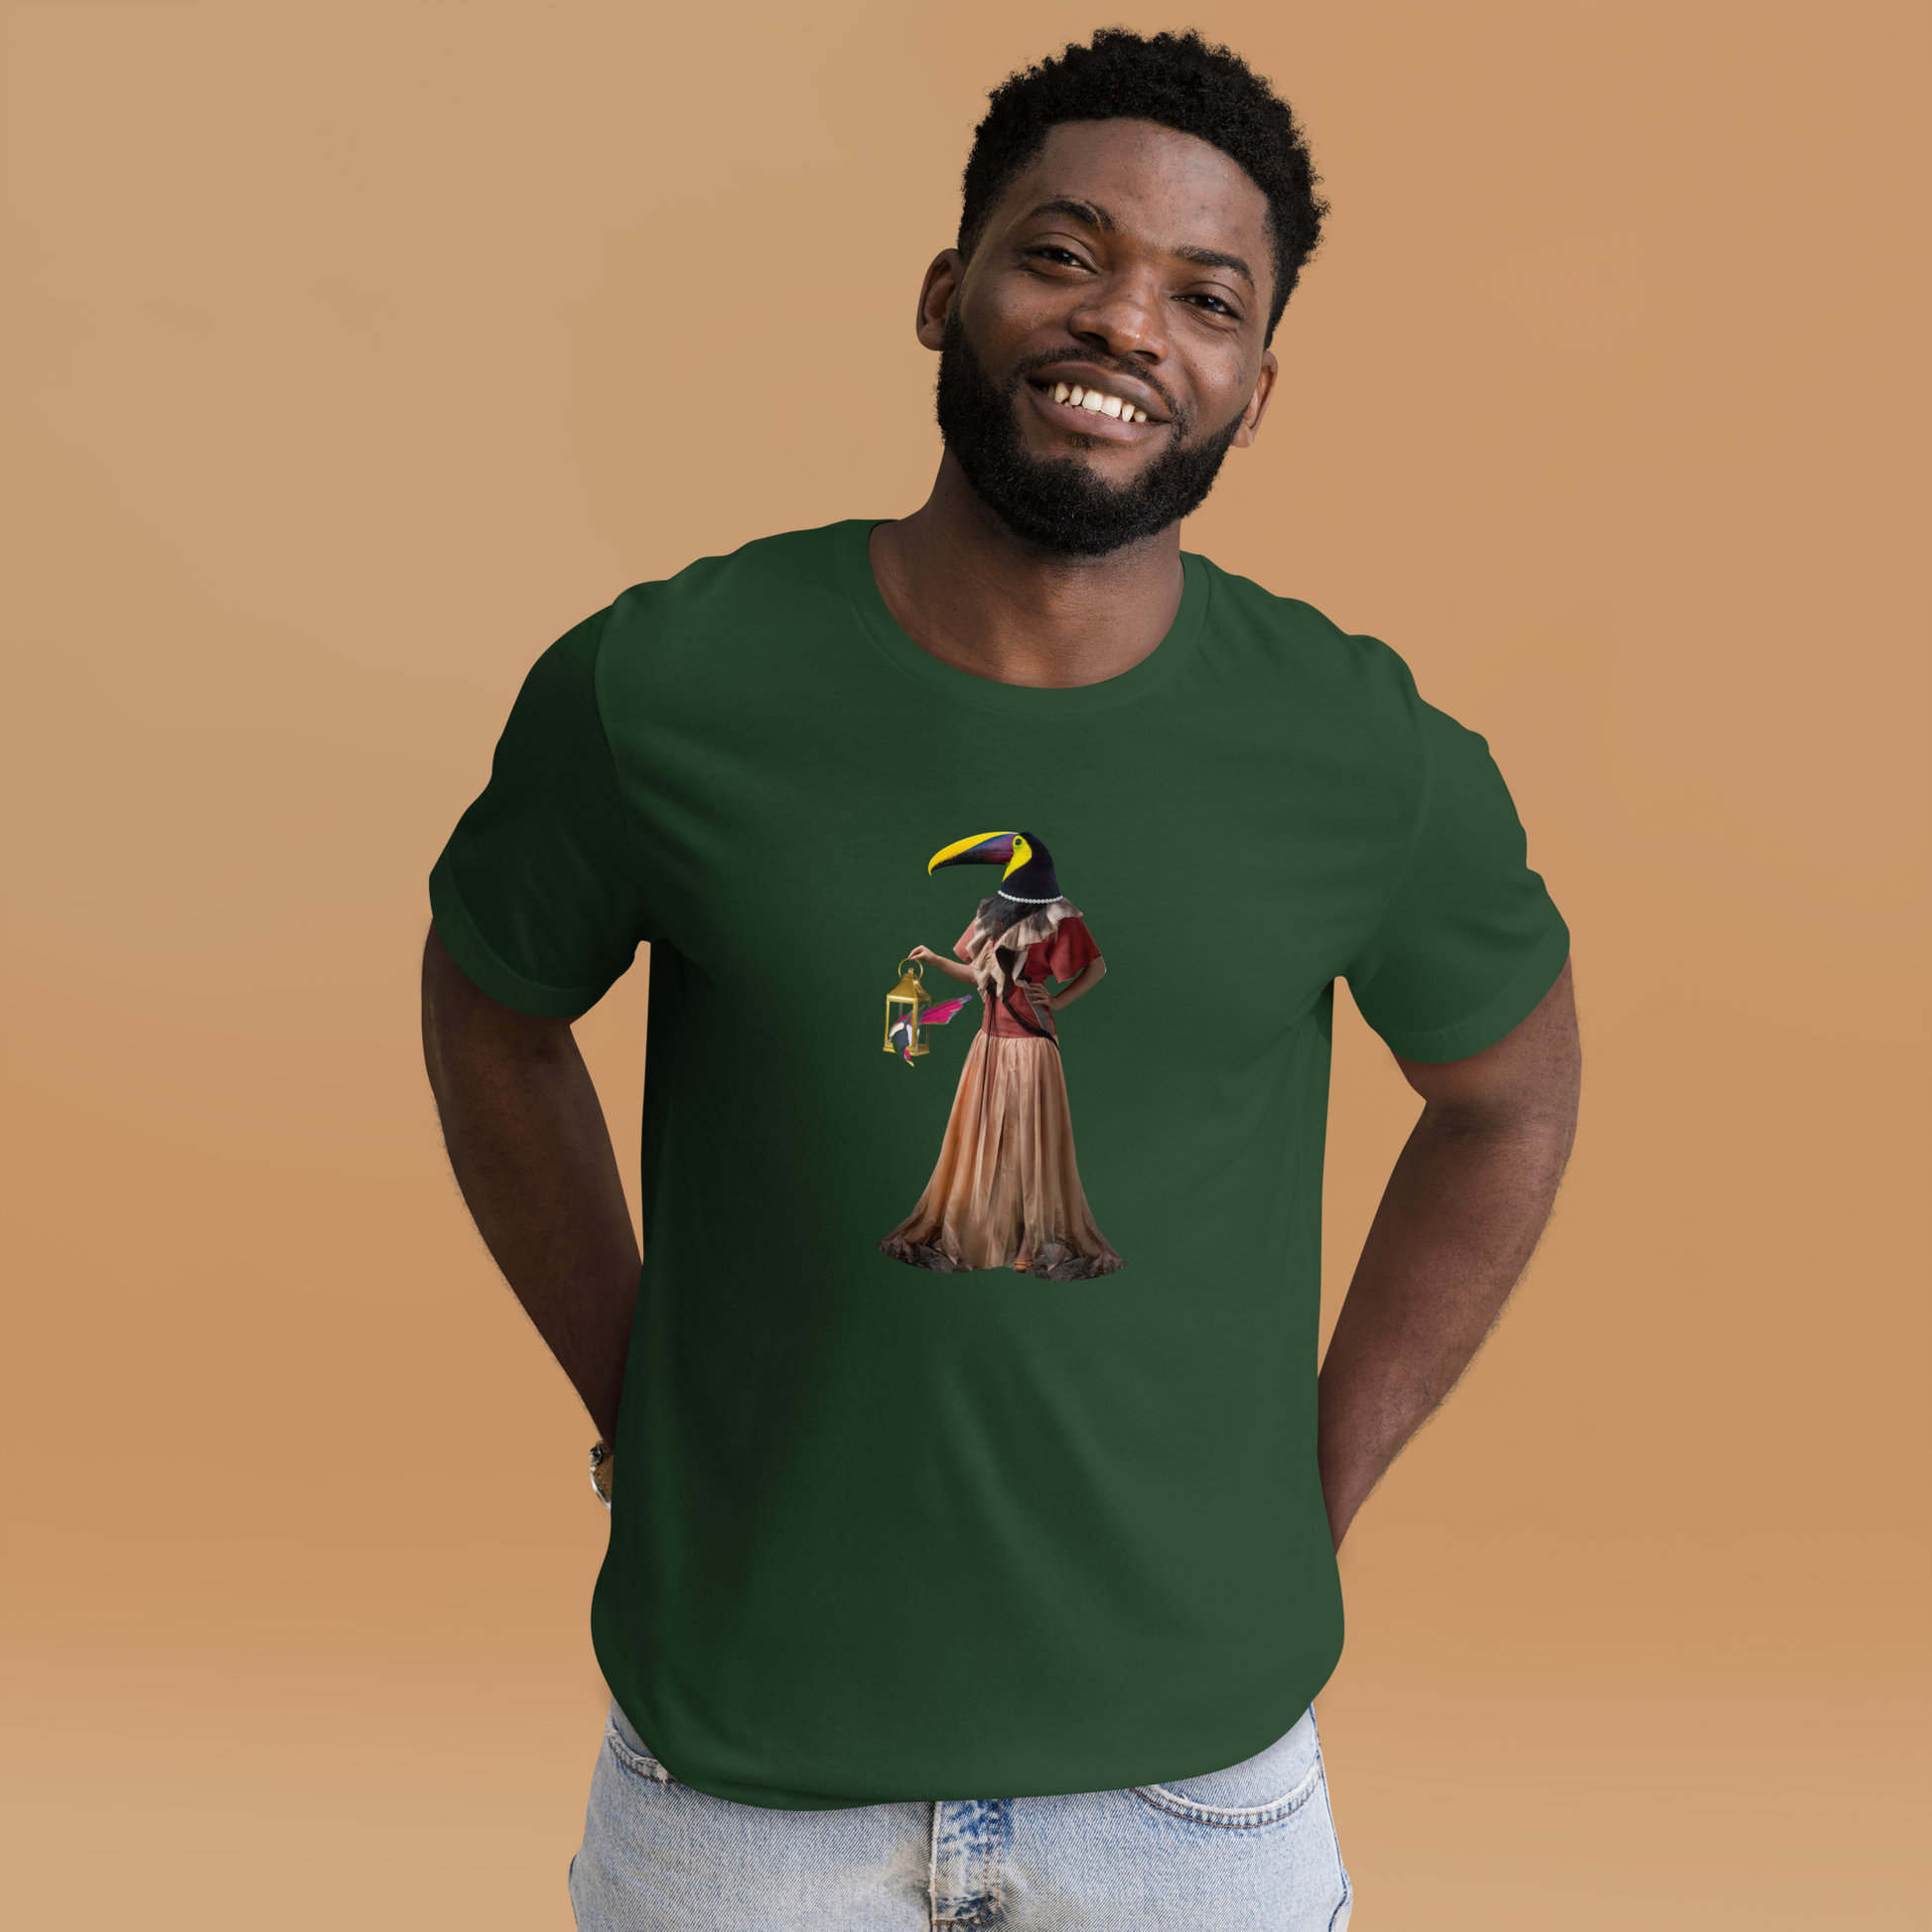 Smiling man wearing a Forest Green Premium Toucan T-Shirt featuring an Anthropomorphic Toucan graphic on the chest - Funny Graphic Toucan Tees - Boozy Fox